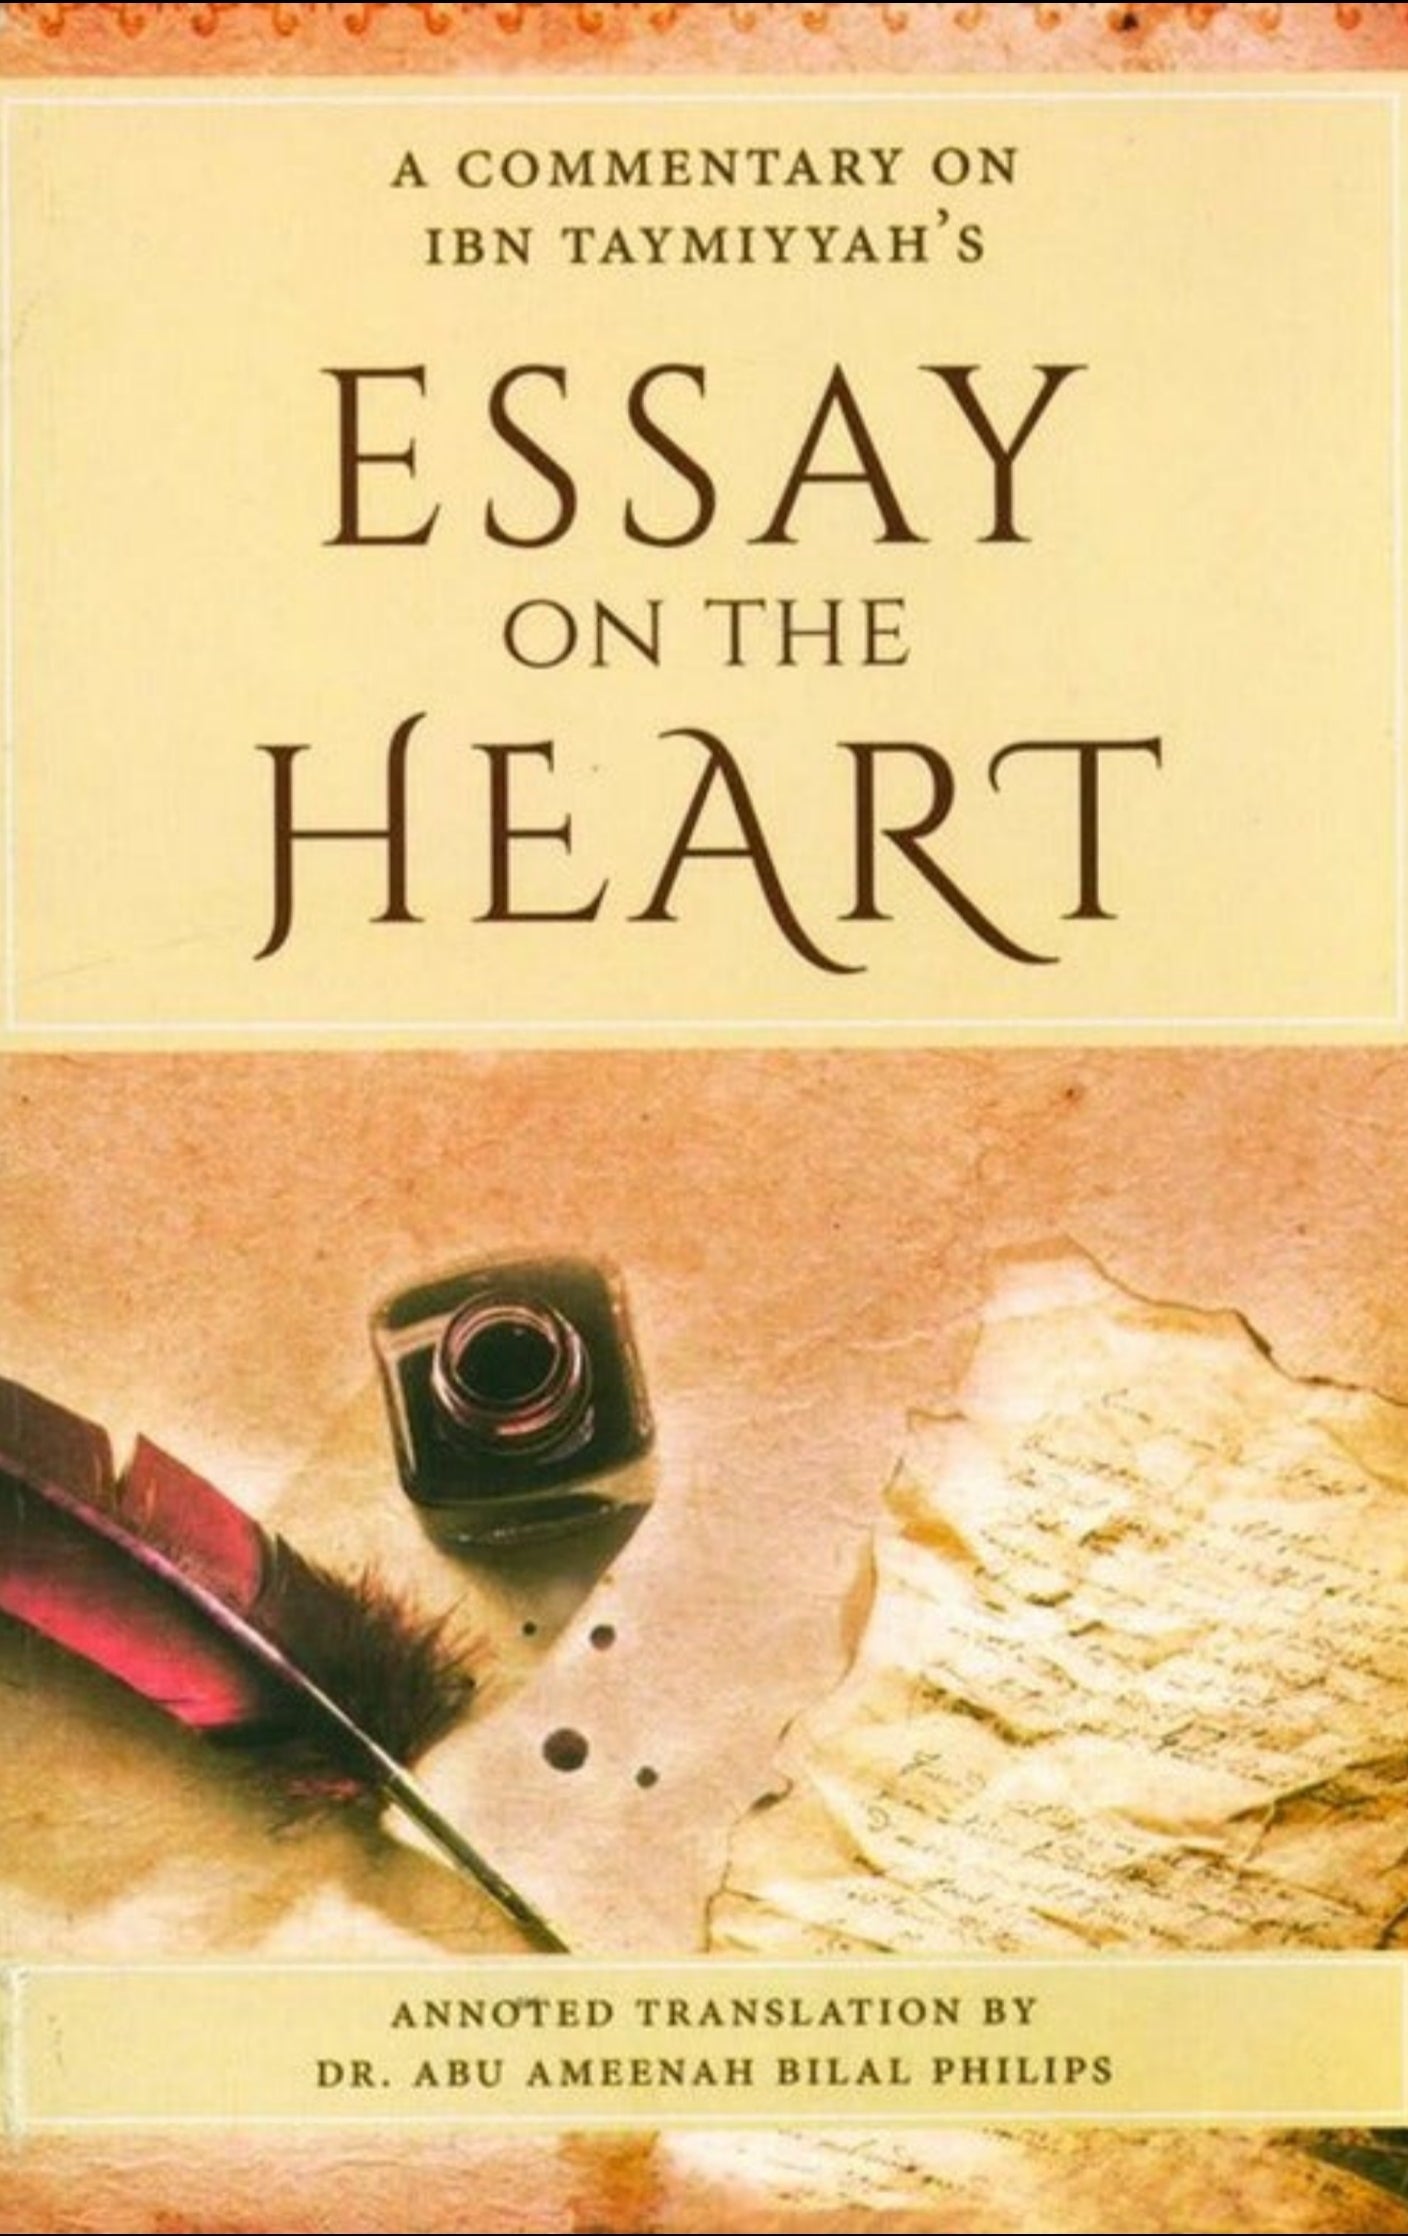 Essay on the Heart (A Commentary by Bilal Philips on Ibn Taymiyyah's book)